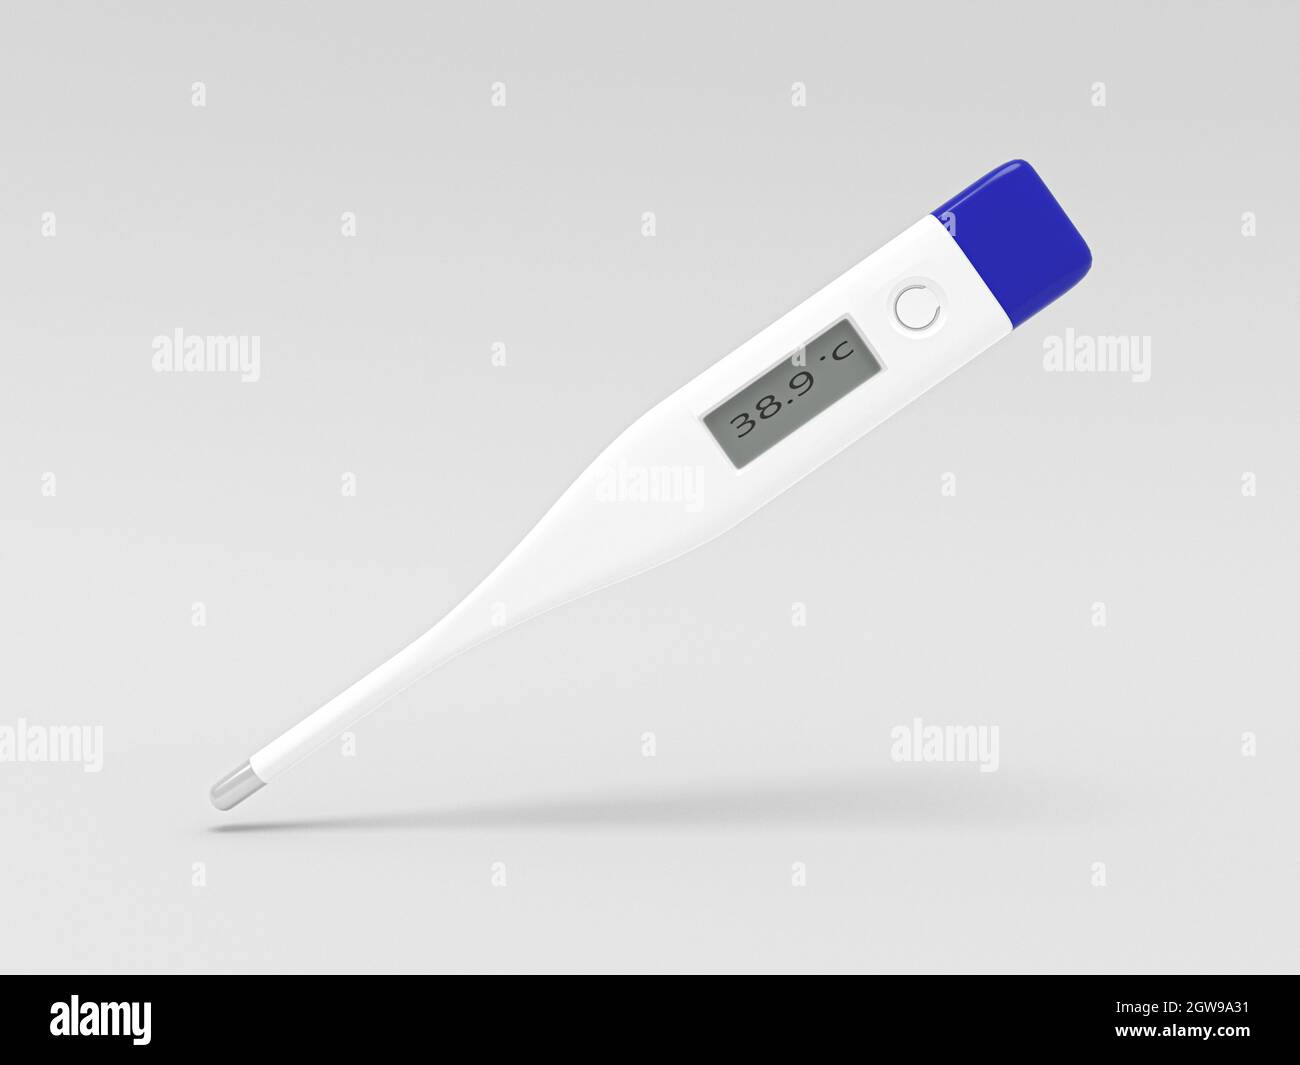 https://c8.alamy.com/comp/2GW9A31/electronic-modern-clinical-digital-thermometer-temperature-measurement-device-3d-illustration-fever-diagnostic-and-healthcare-concept-2GW9A31.jpg